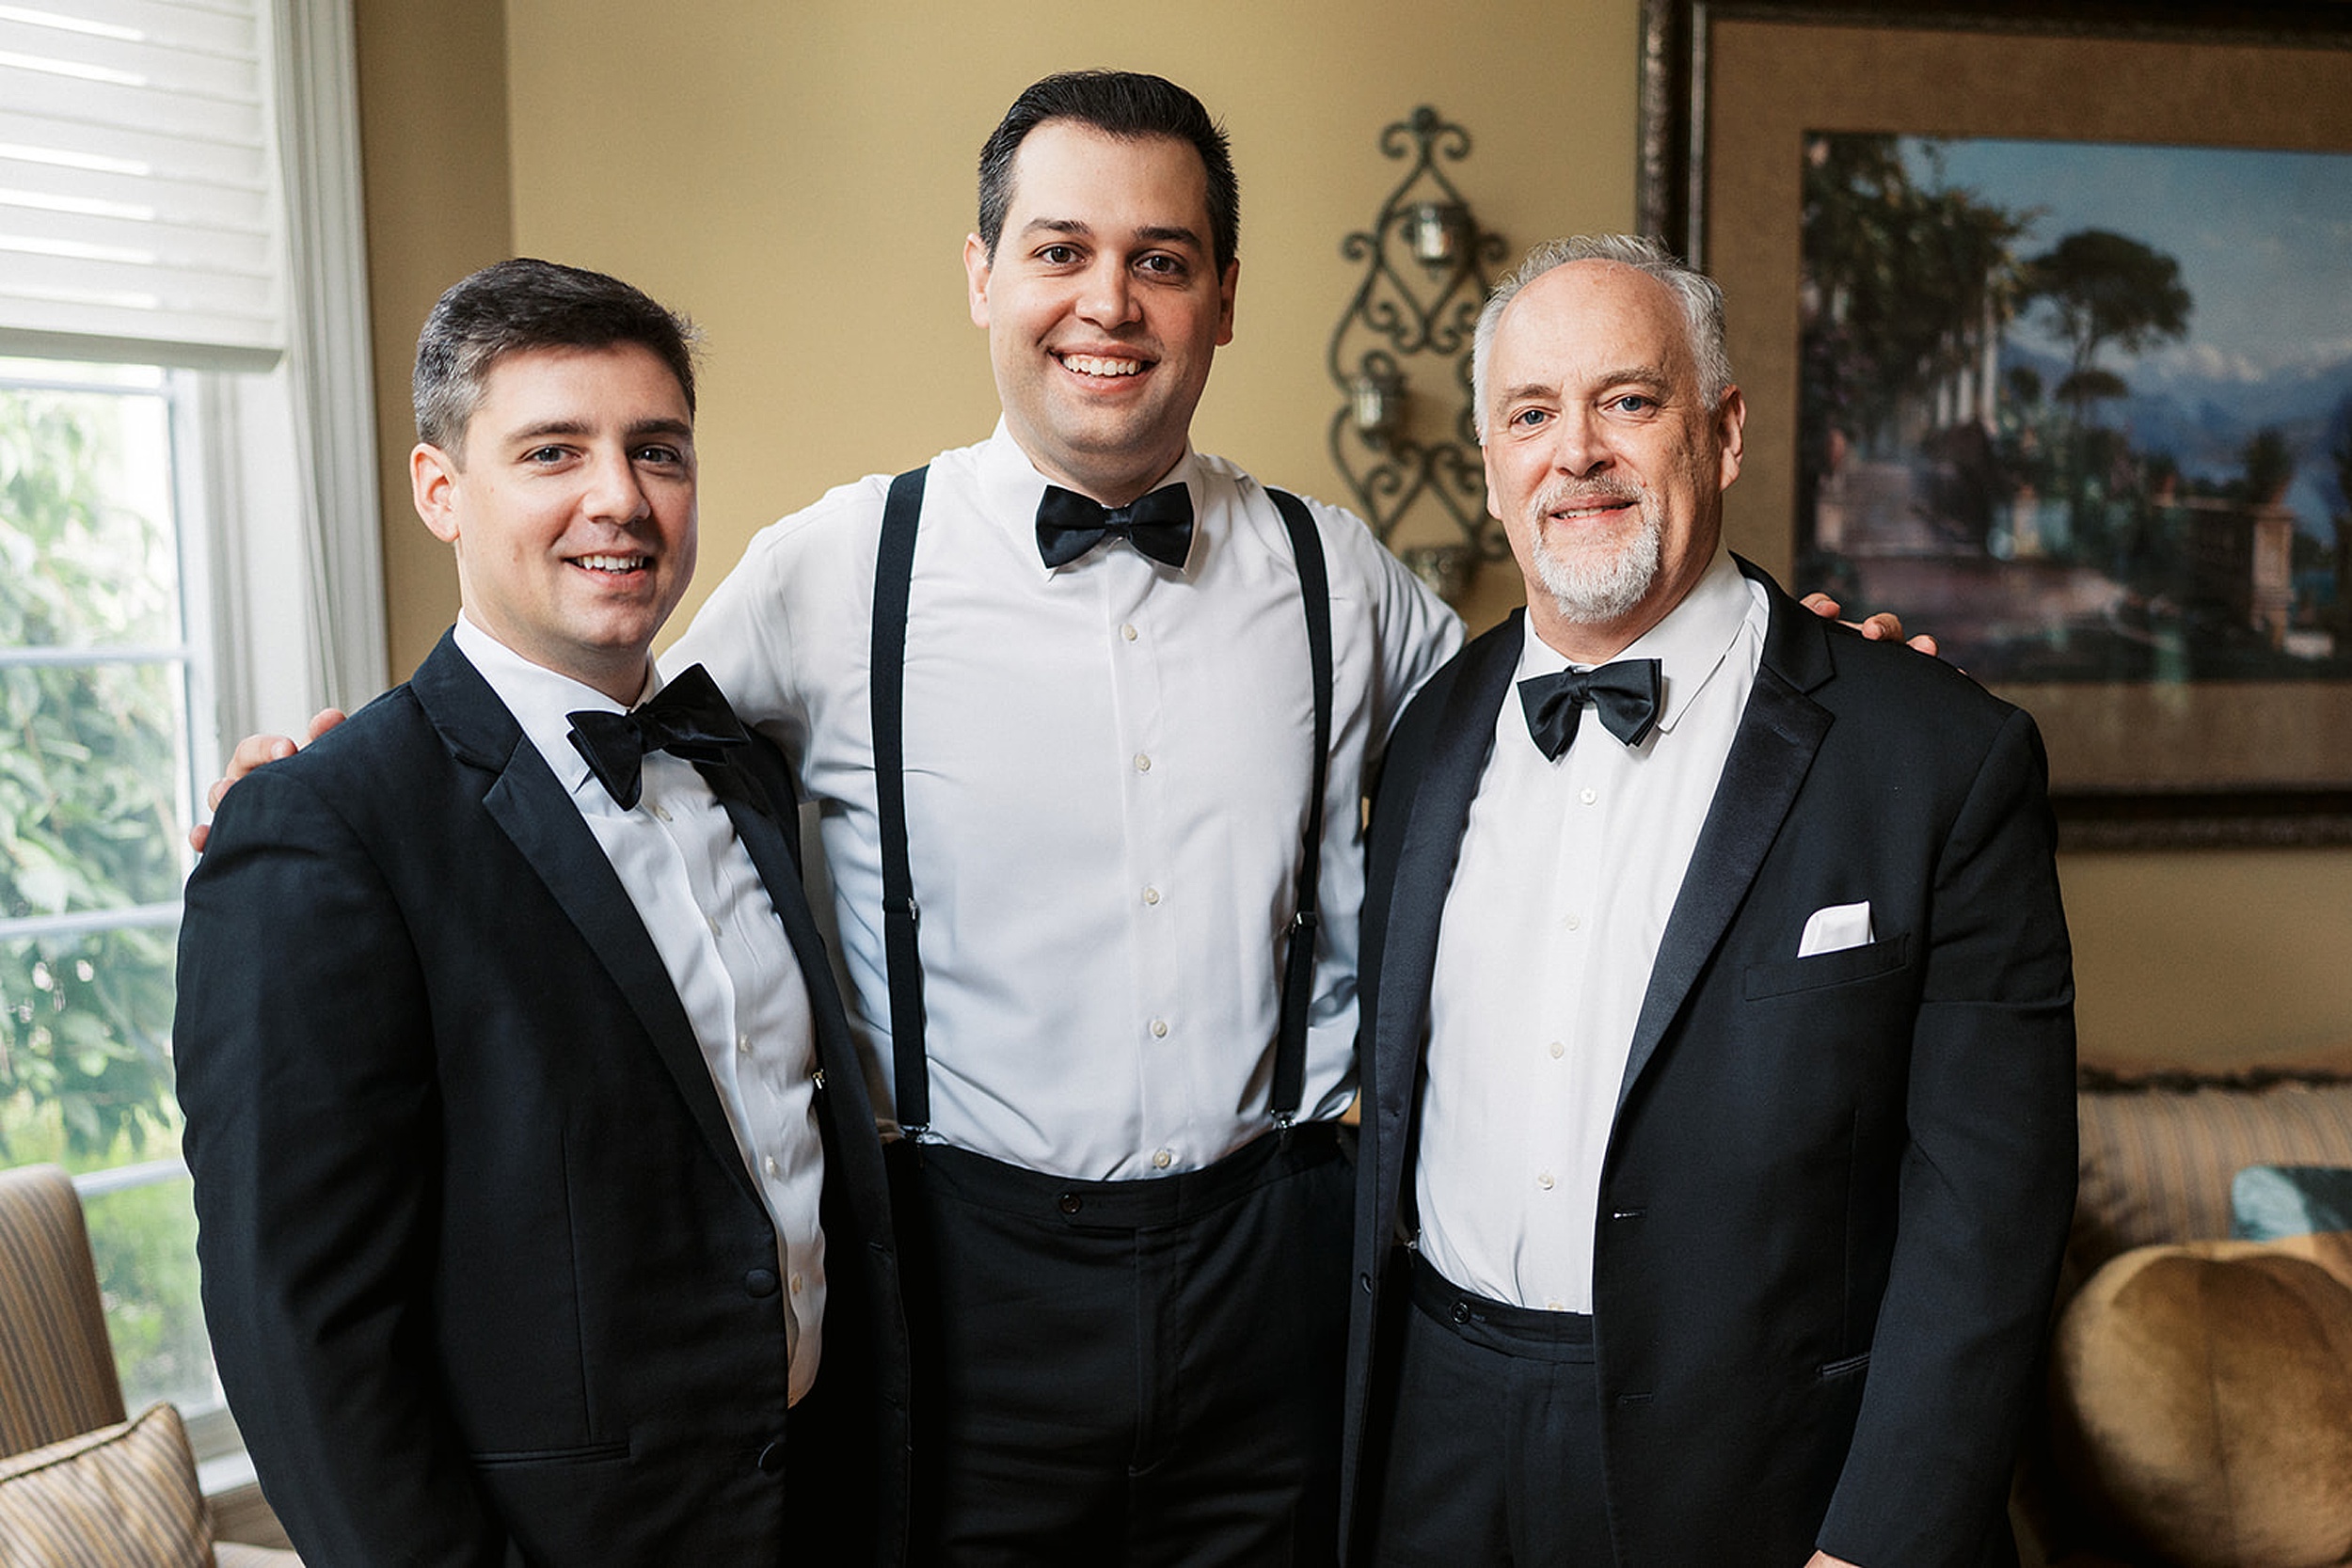 A groom stands in a room with his father and brother in black tuxedos and bowties by a window